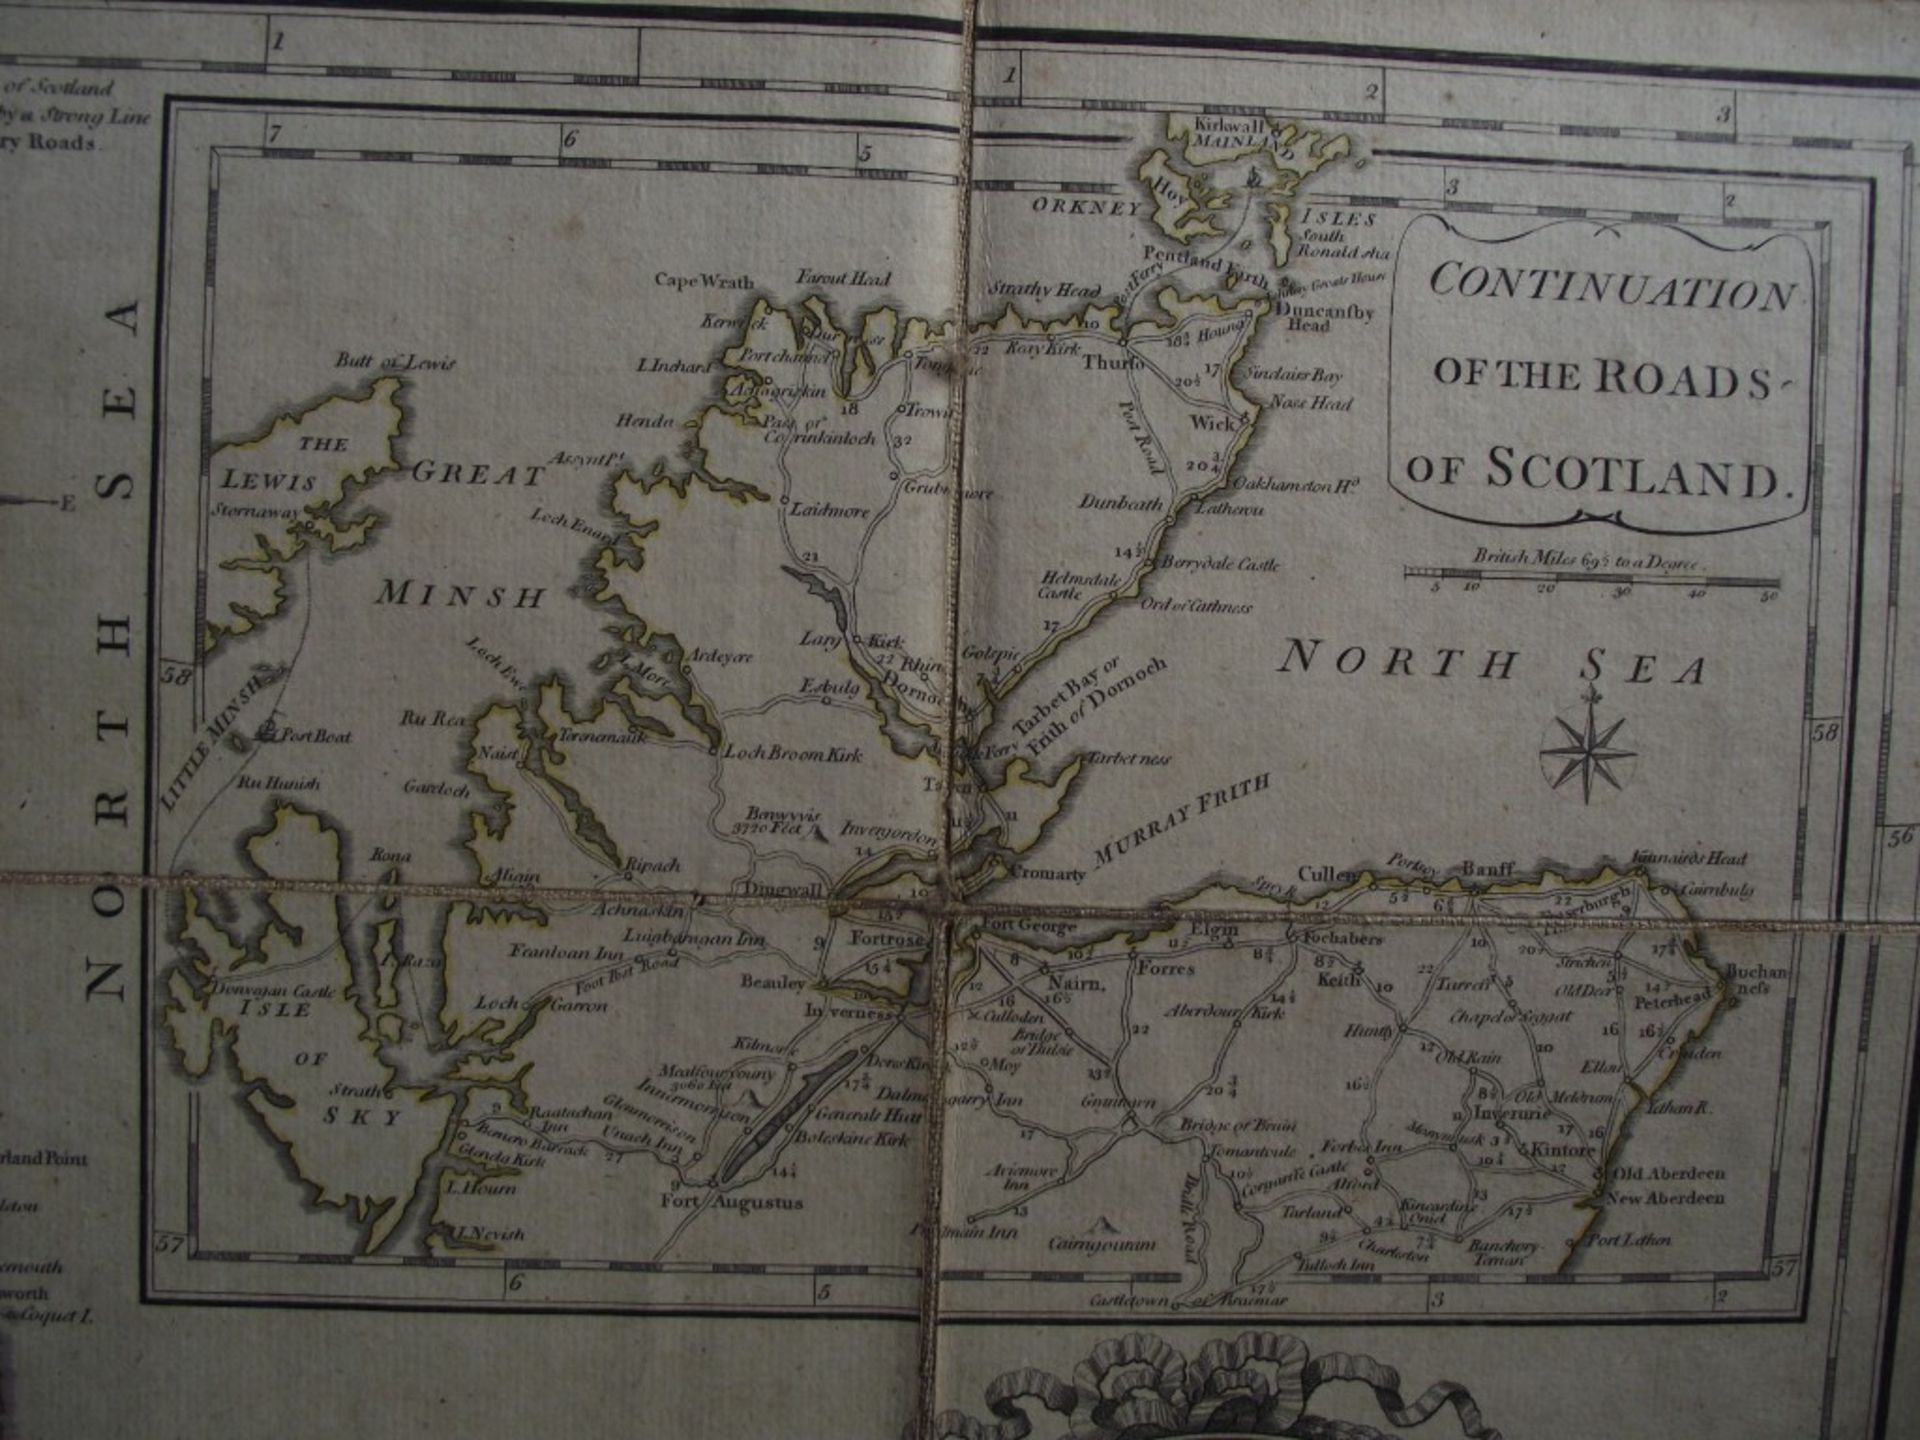 A New Map of the Roads of Ireland and Scotland - by Laurie & Whittle - 12th May 1794 - Original c... - Image 23 of 31